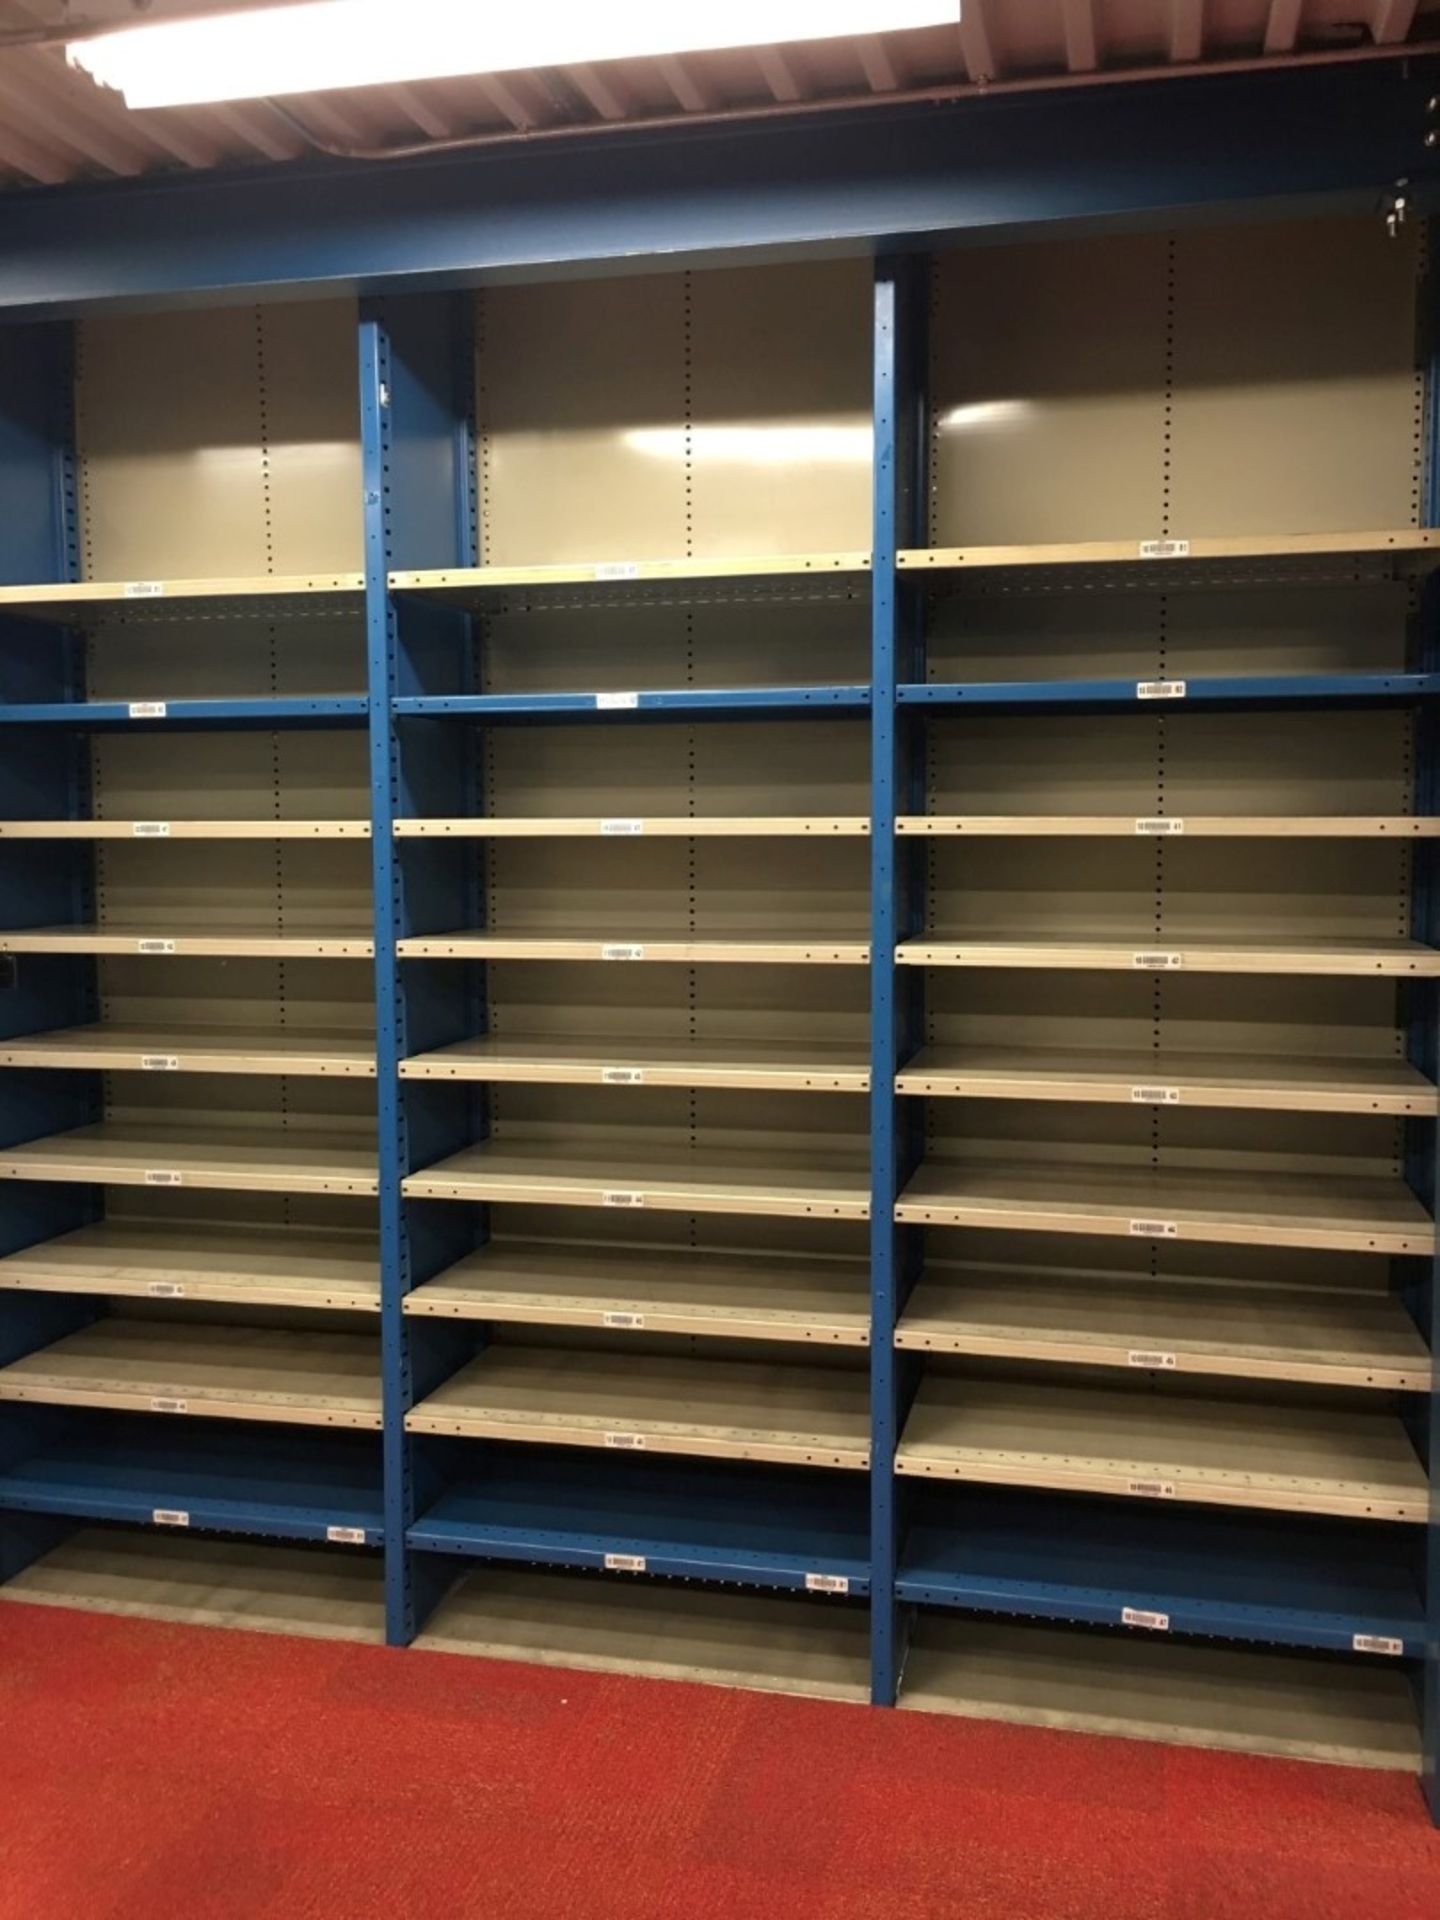 26 SECTIONS OF HALLOWELL H-POST CLOSED SHELVING (BACK TO BACK), SIZE: 98"H X 18"D X 36"W - Image 2 of 2